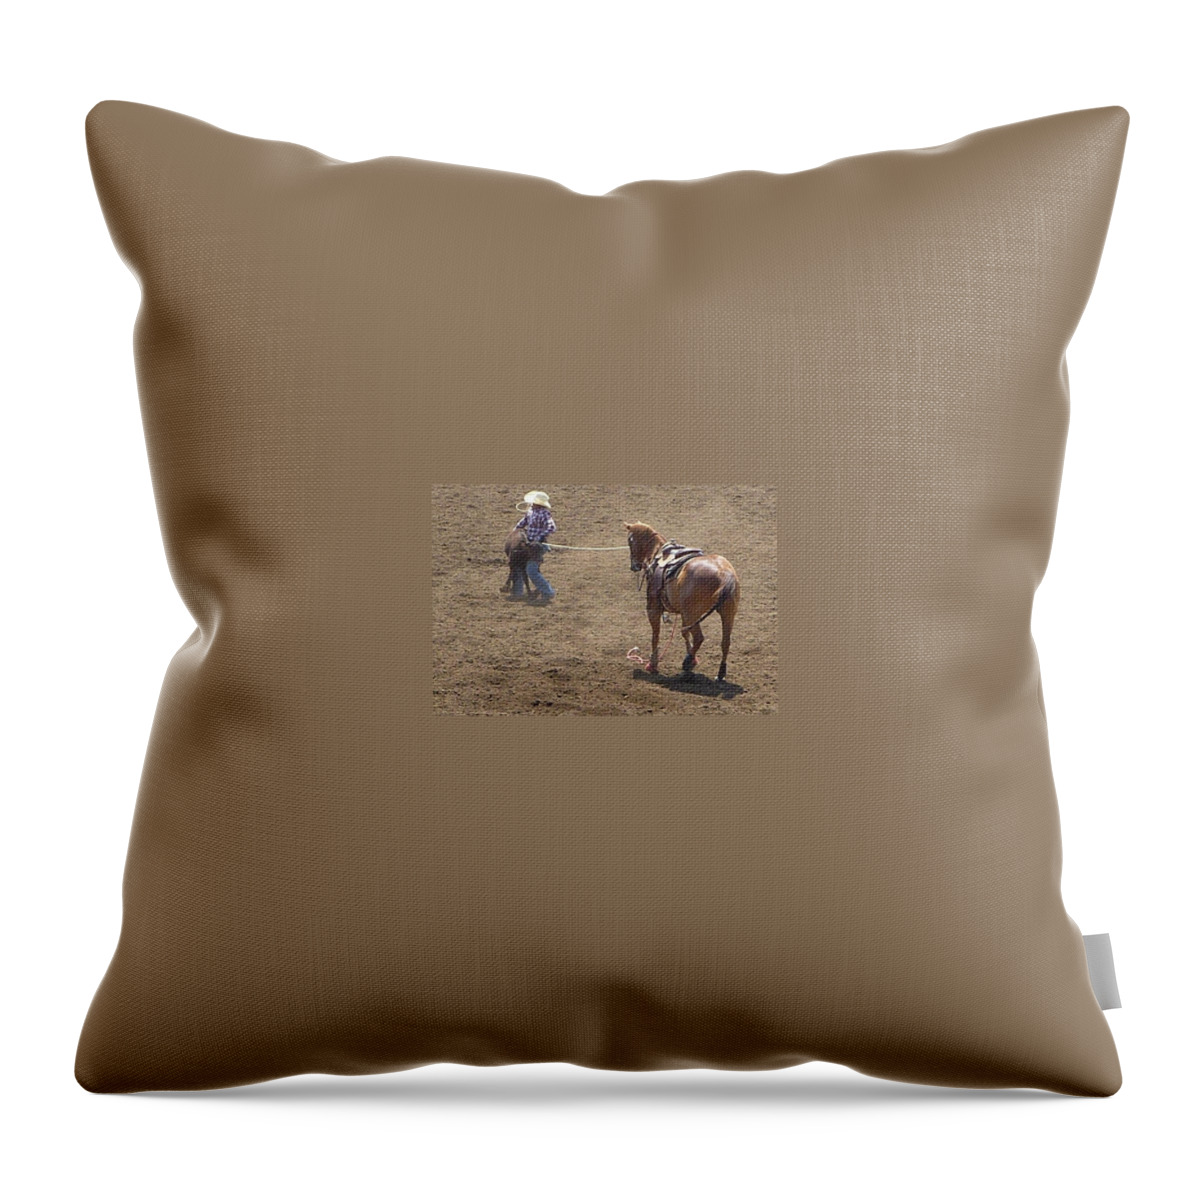 Horse And Rider Throw Pillow featuring the photograph Rodeo Time Calf Roping 2 by Susan Garren